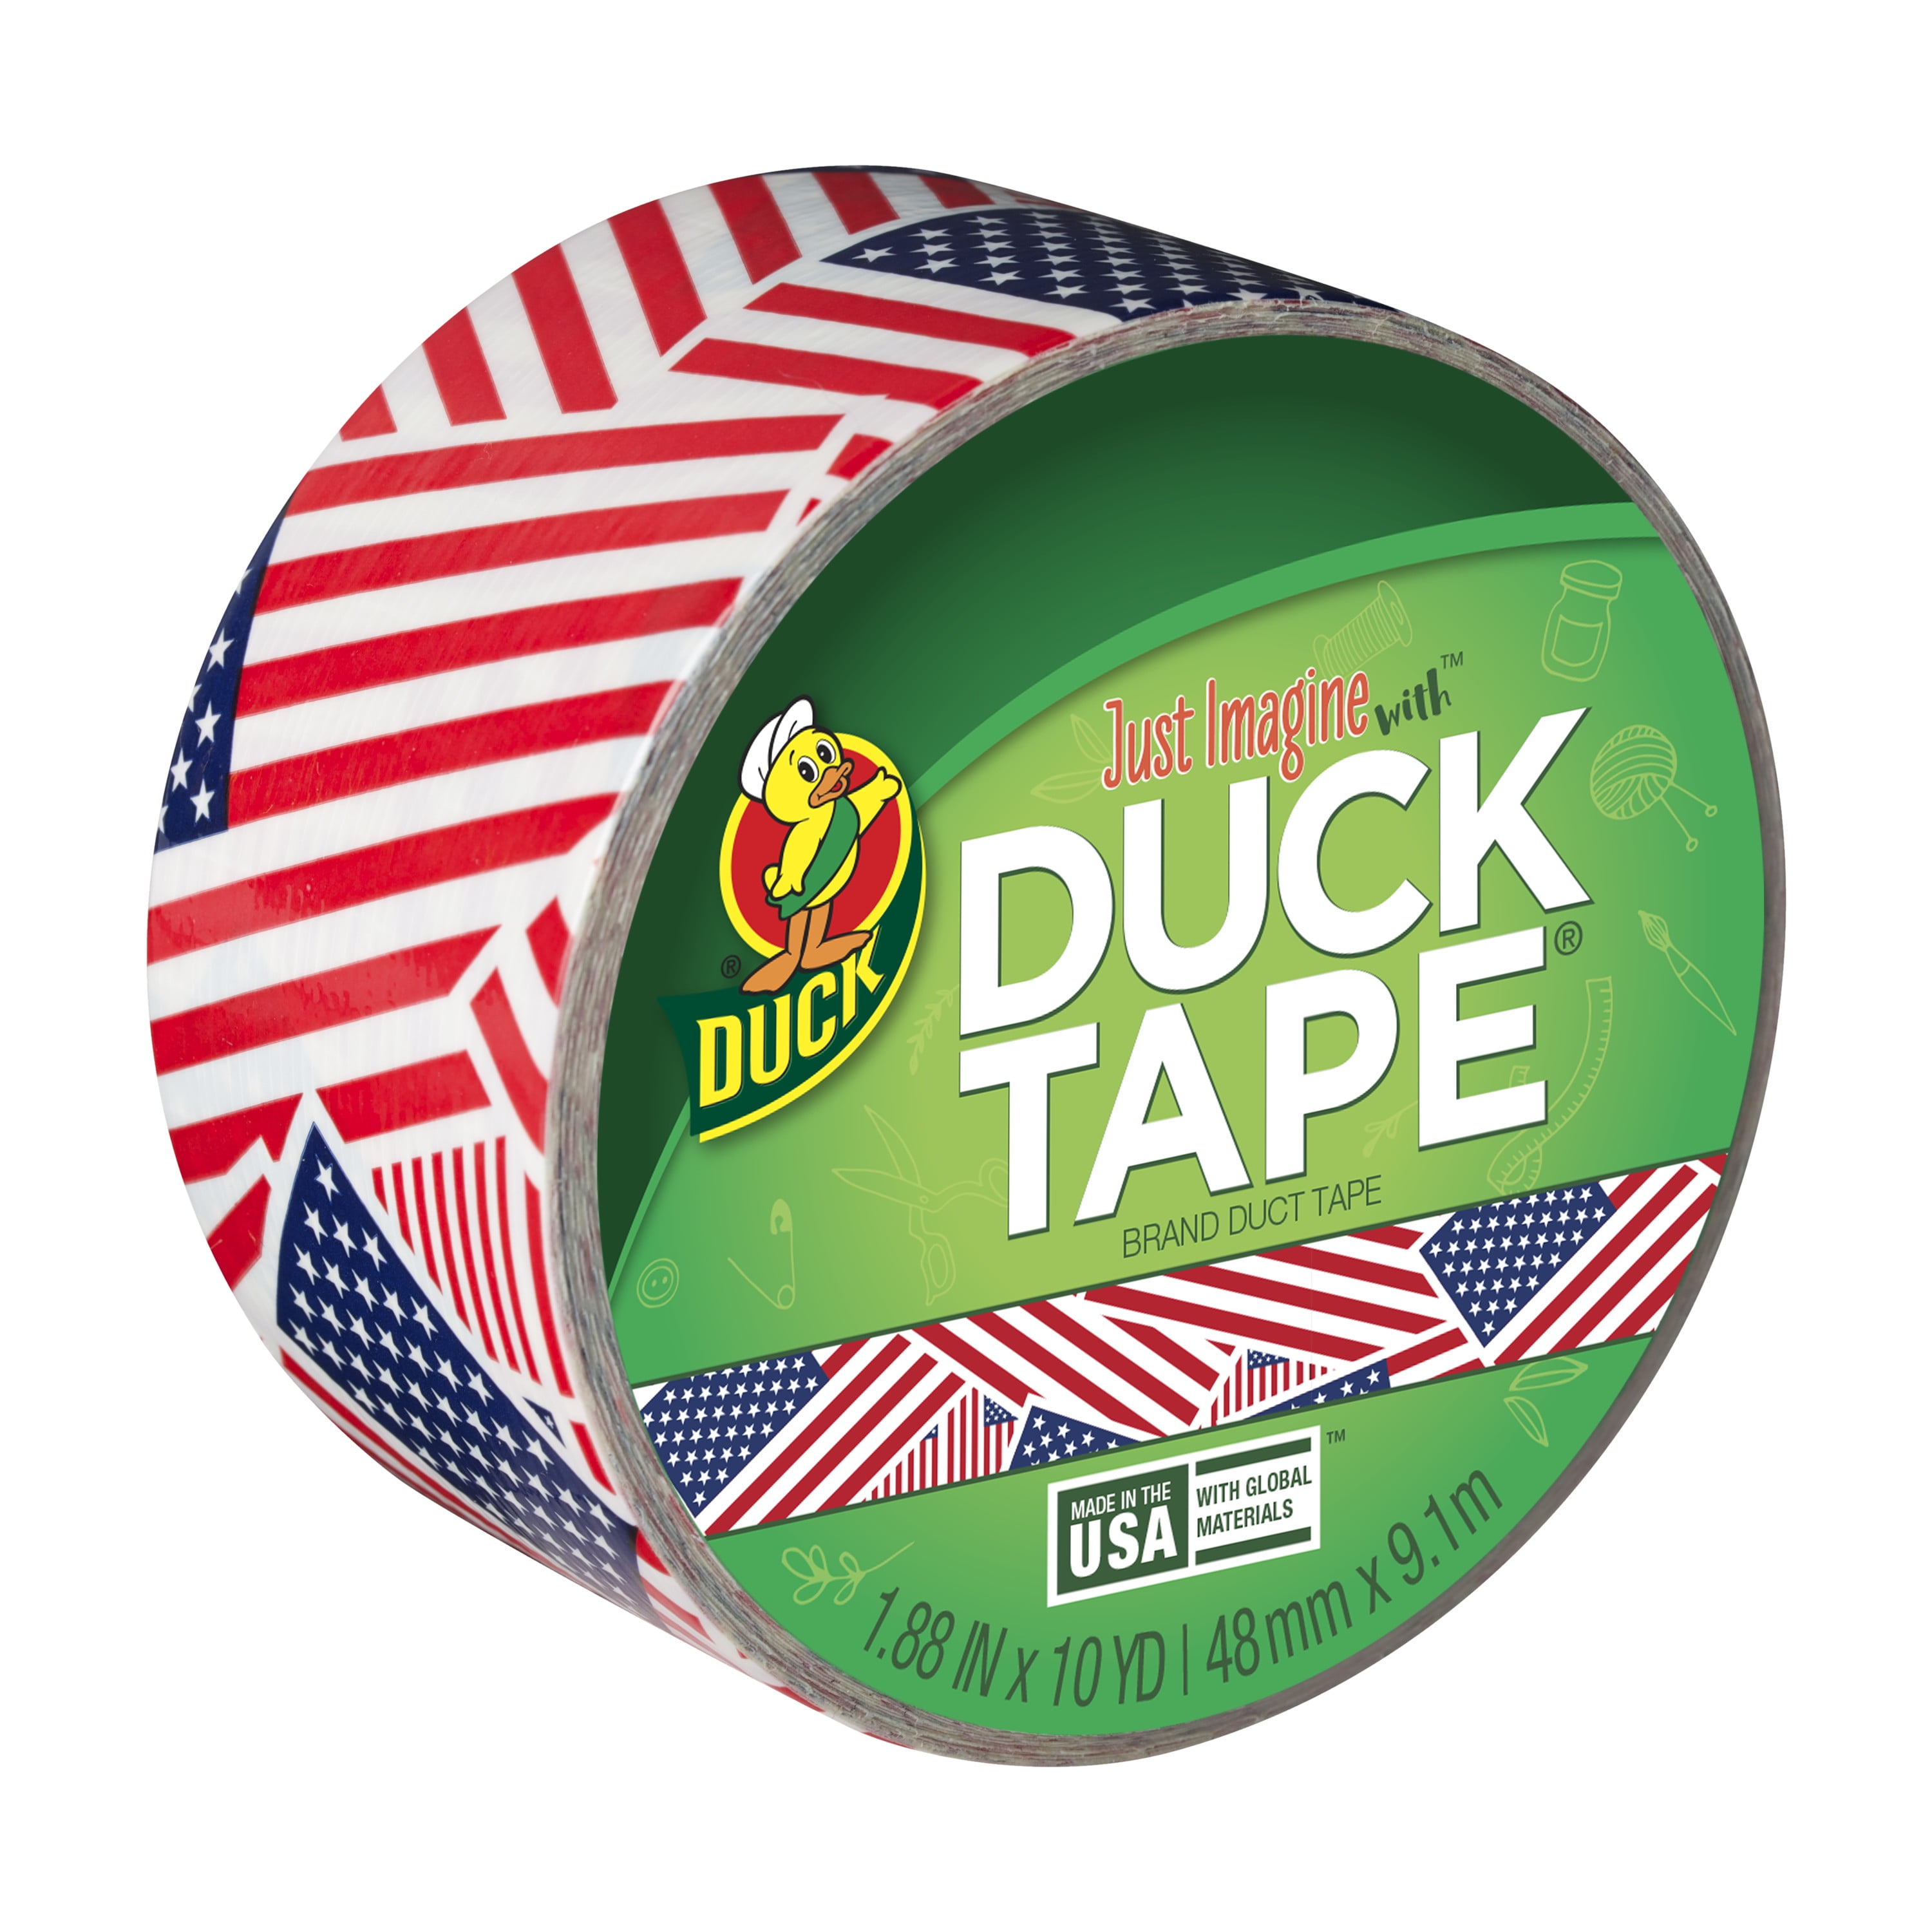 Oregon College Duck Tape 1.88 inch x 10 yd duct tape 